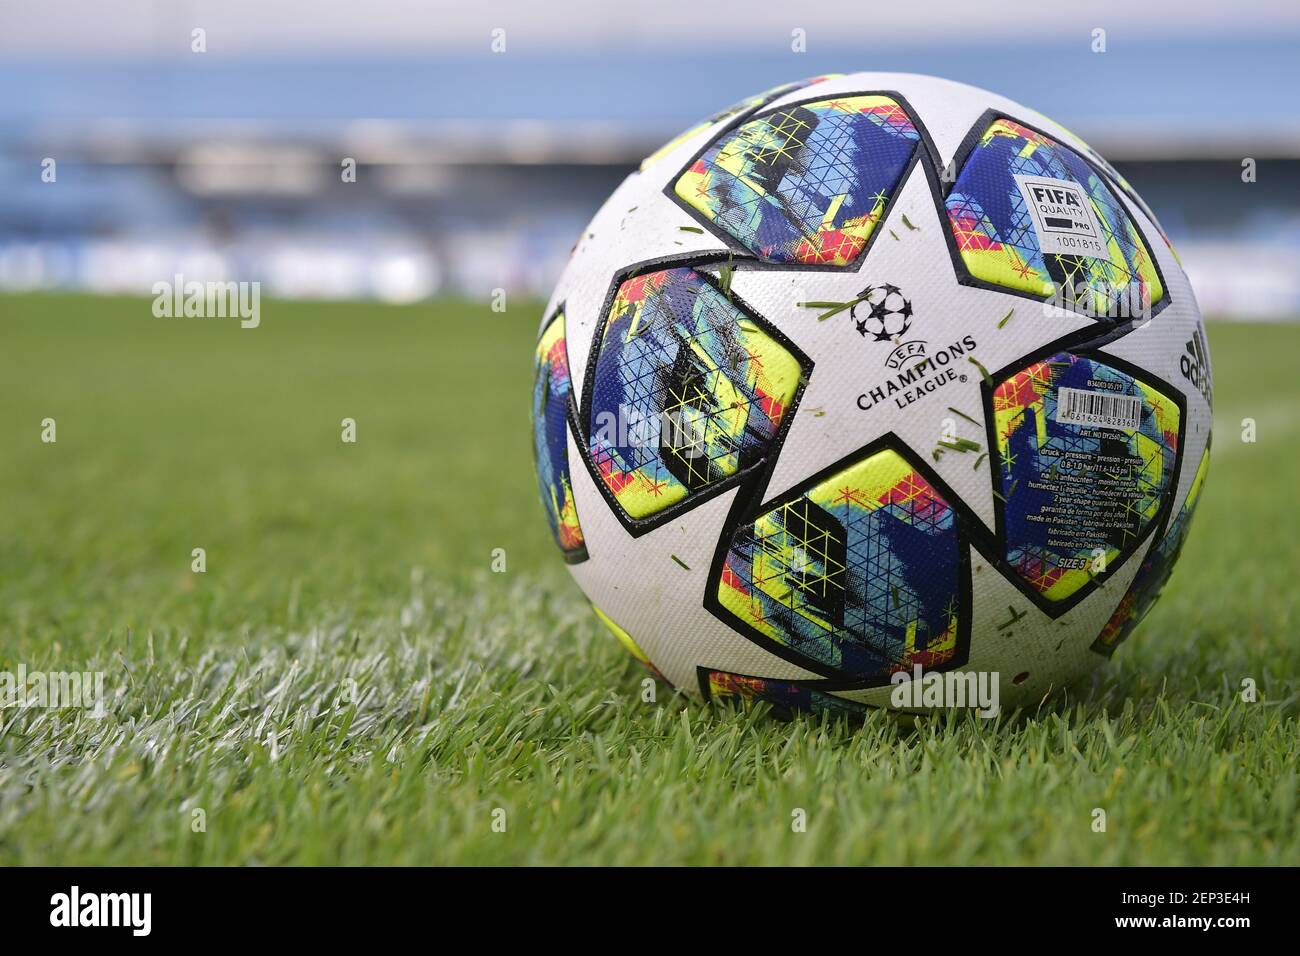 Illustration picture shows the official Adidas Finale 19 Champions League  match ball during a training session of Belgian soccer team KRC Genk,  Tuesday 22 October 2019 in Genk, in preparation of tomorrow's